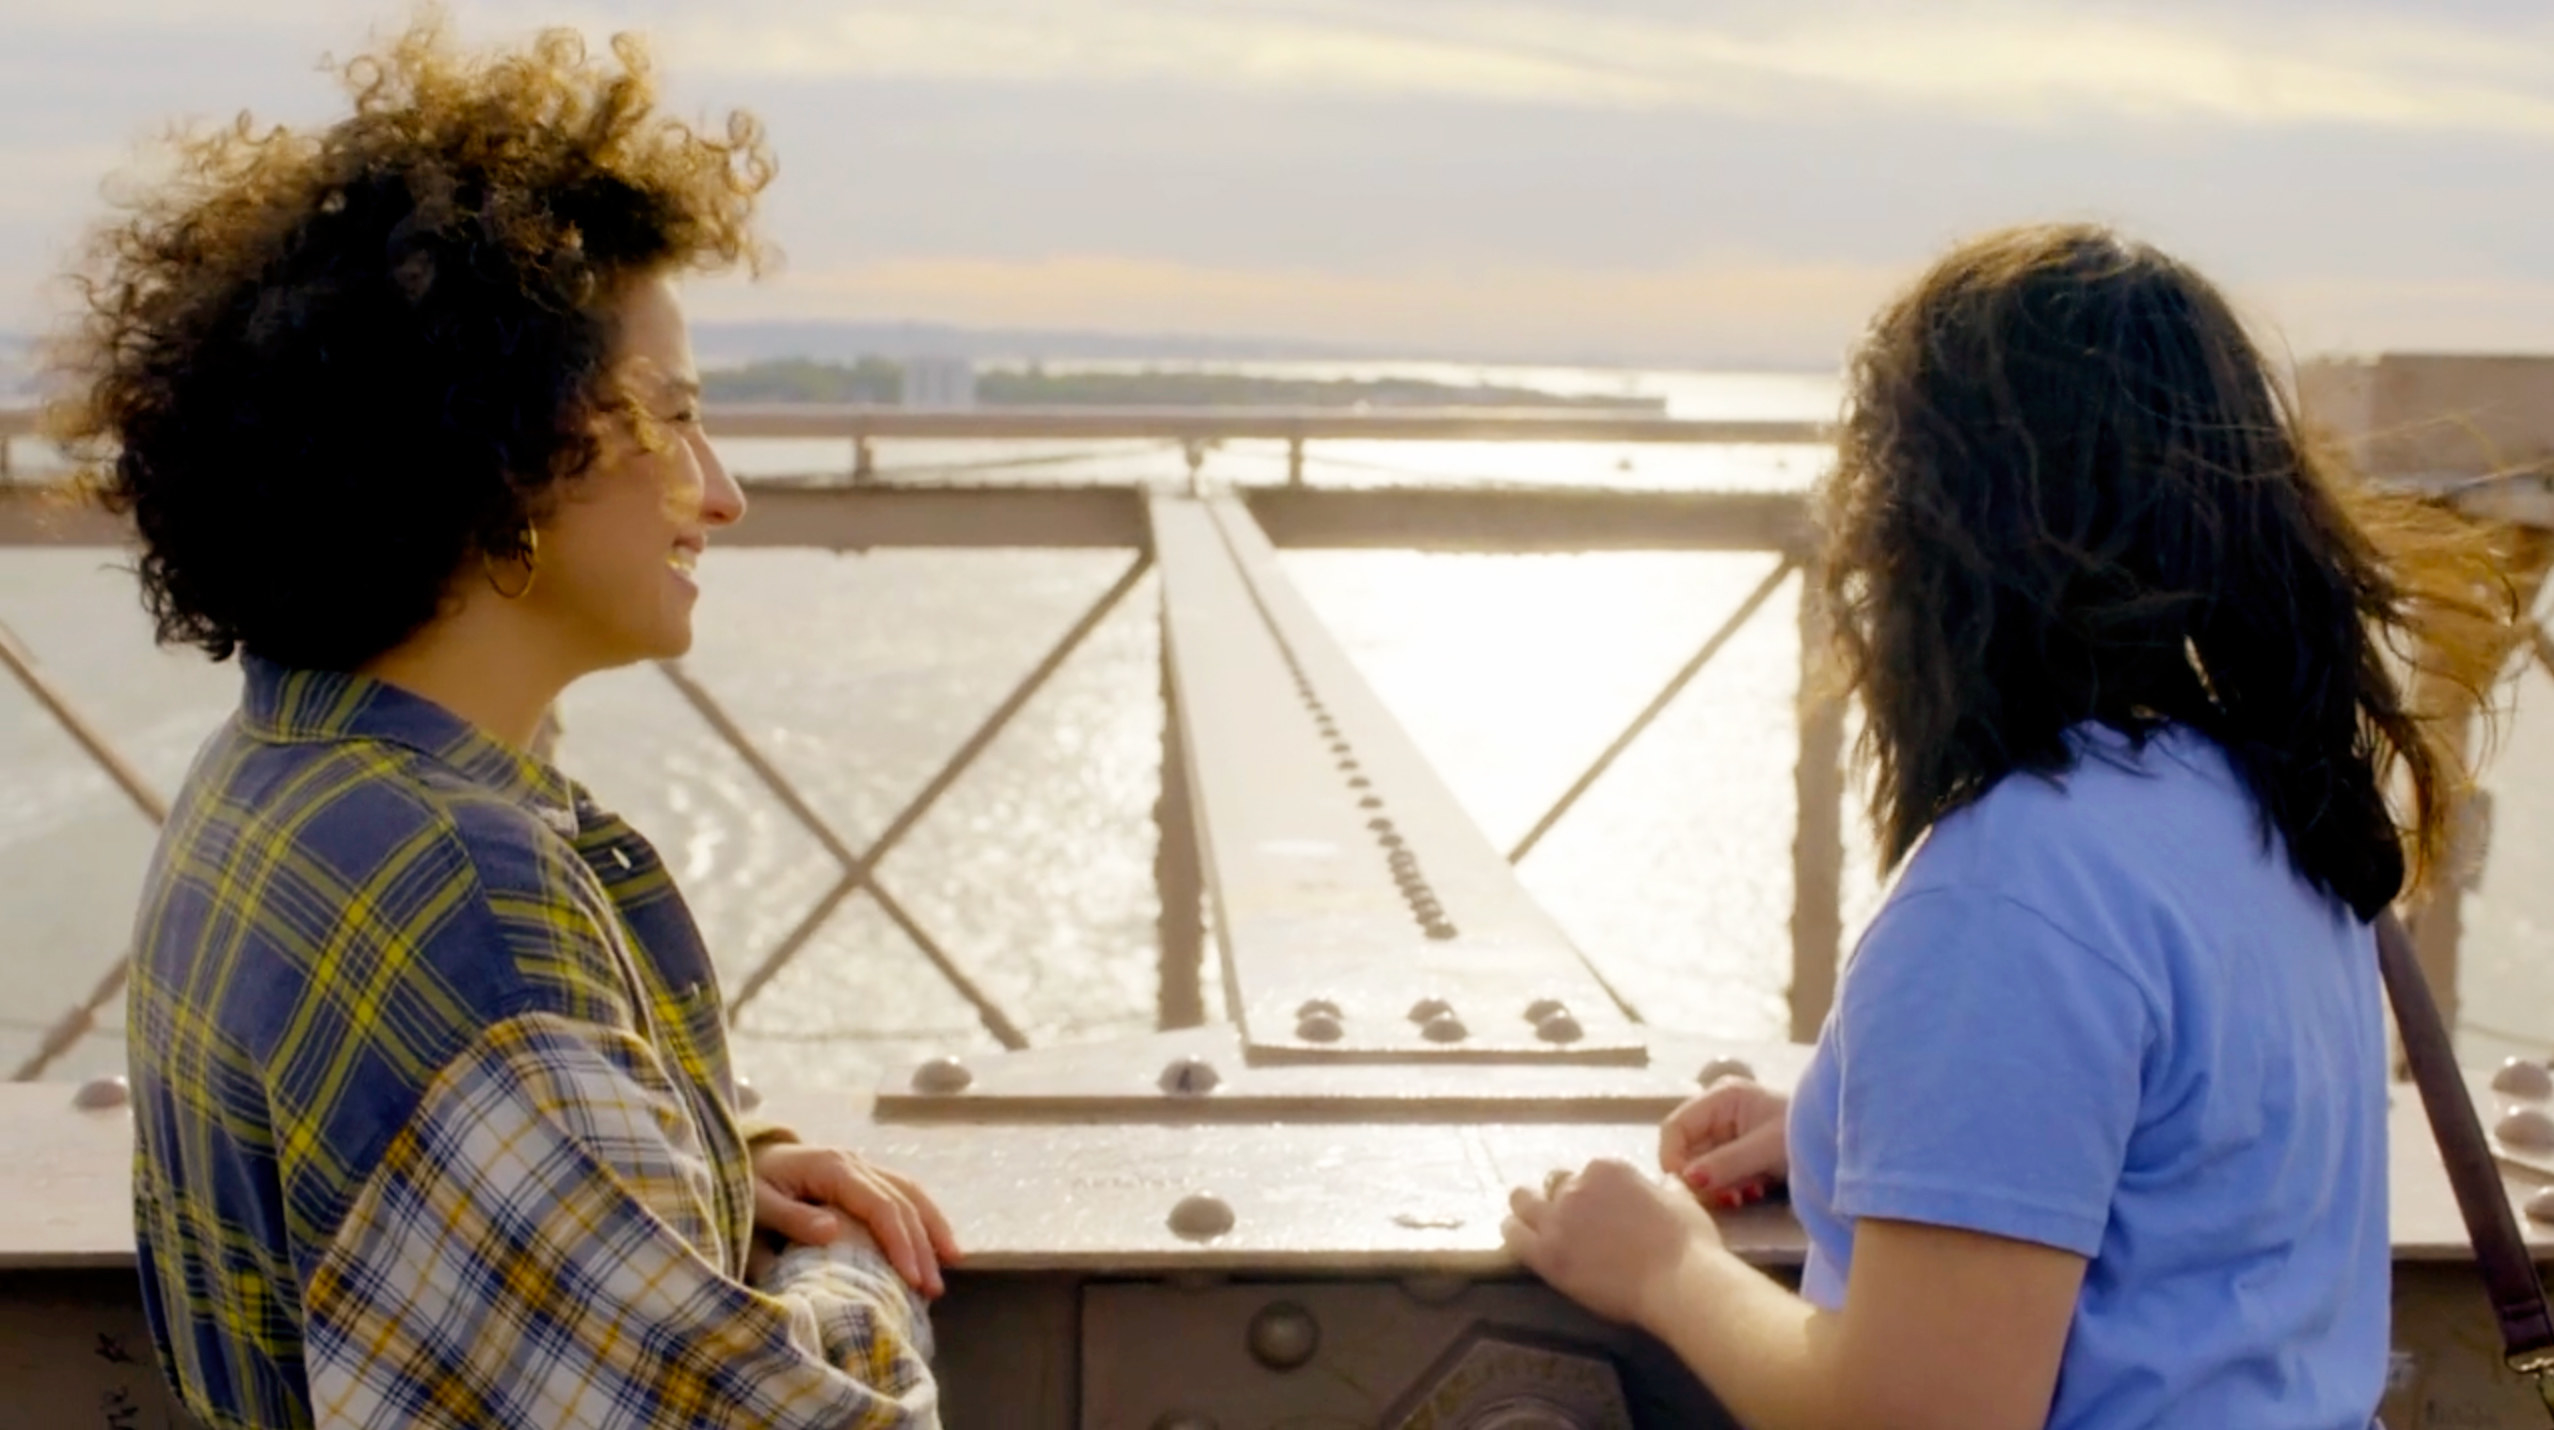 A screenshot from the show&#x27;s finale shows Ilana and Abby on the Brooklyn Bridge. Ilana is smiling with her hands folded on the side of the bridge, looking over at Abby, who is looking out at the water, her hair blowing in the wind behind her.